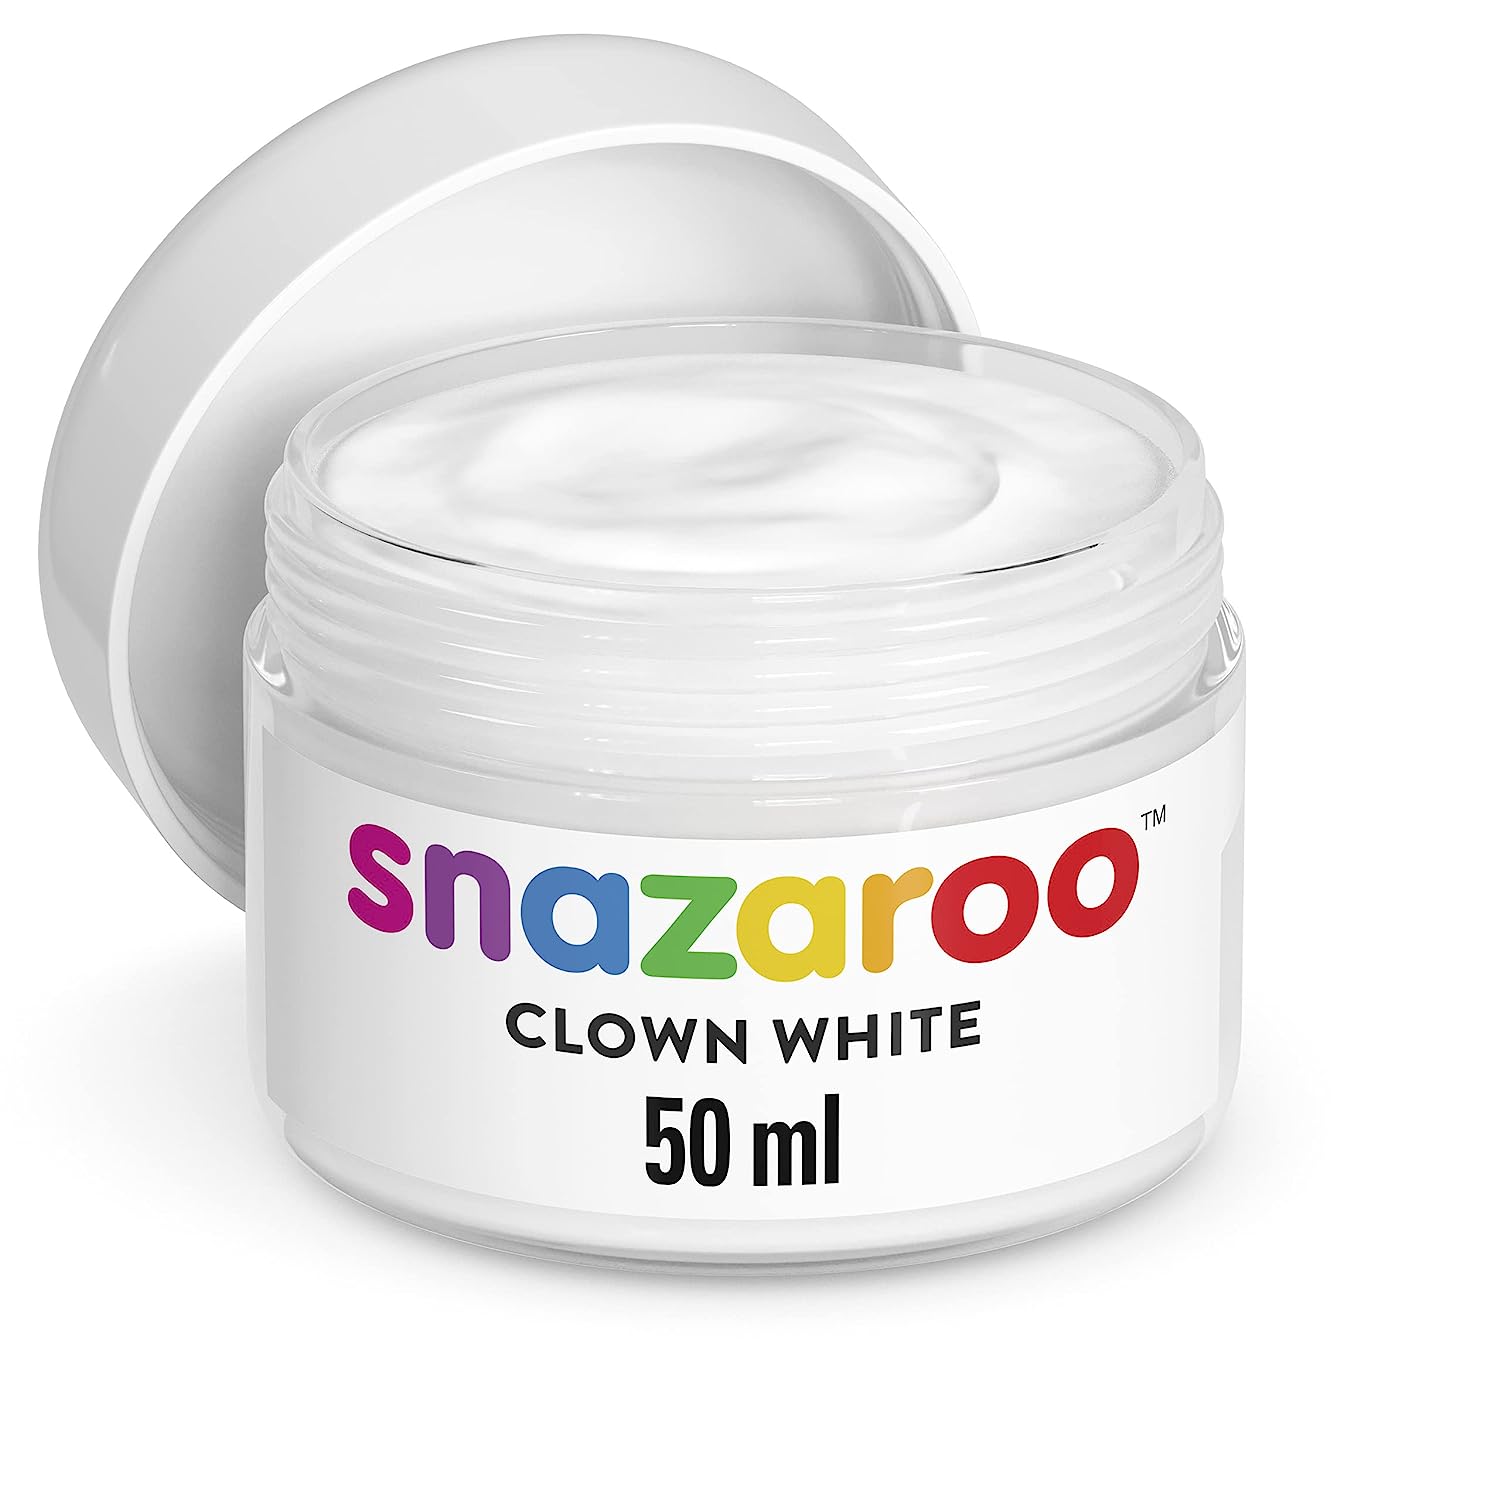 Snazaroo Face and Body Paint, Clown White, 50ml